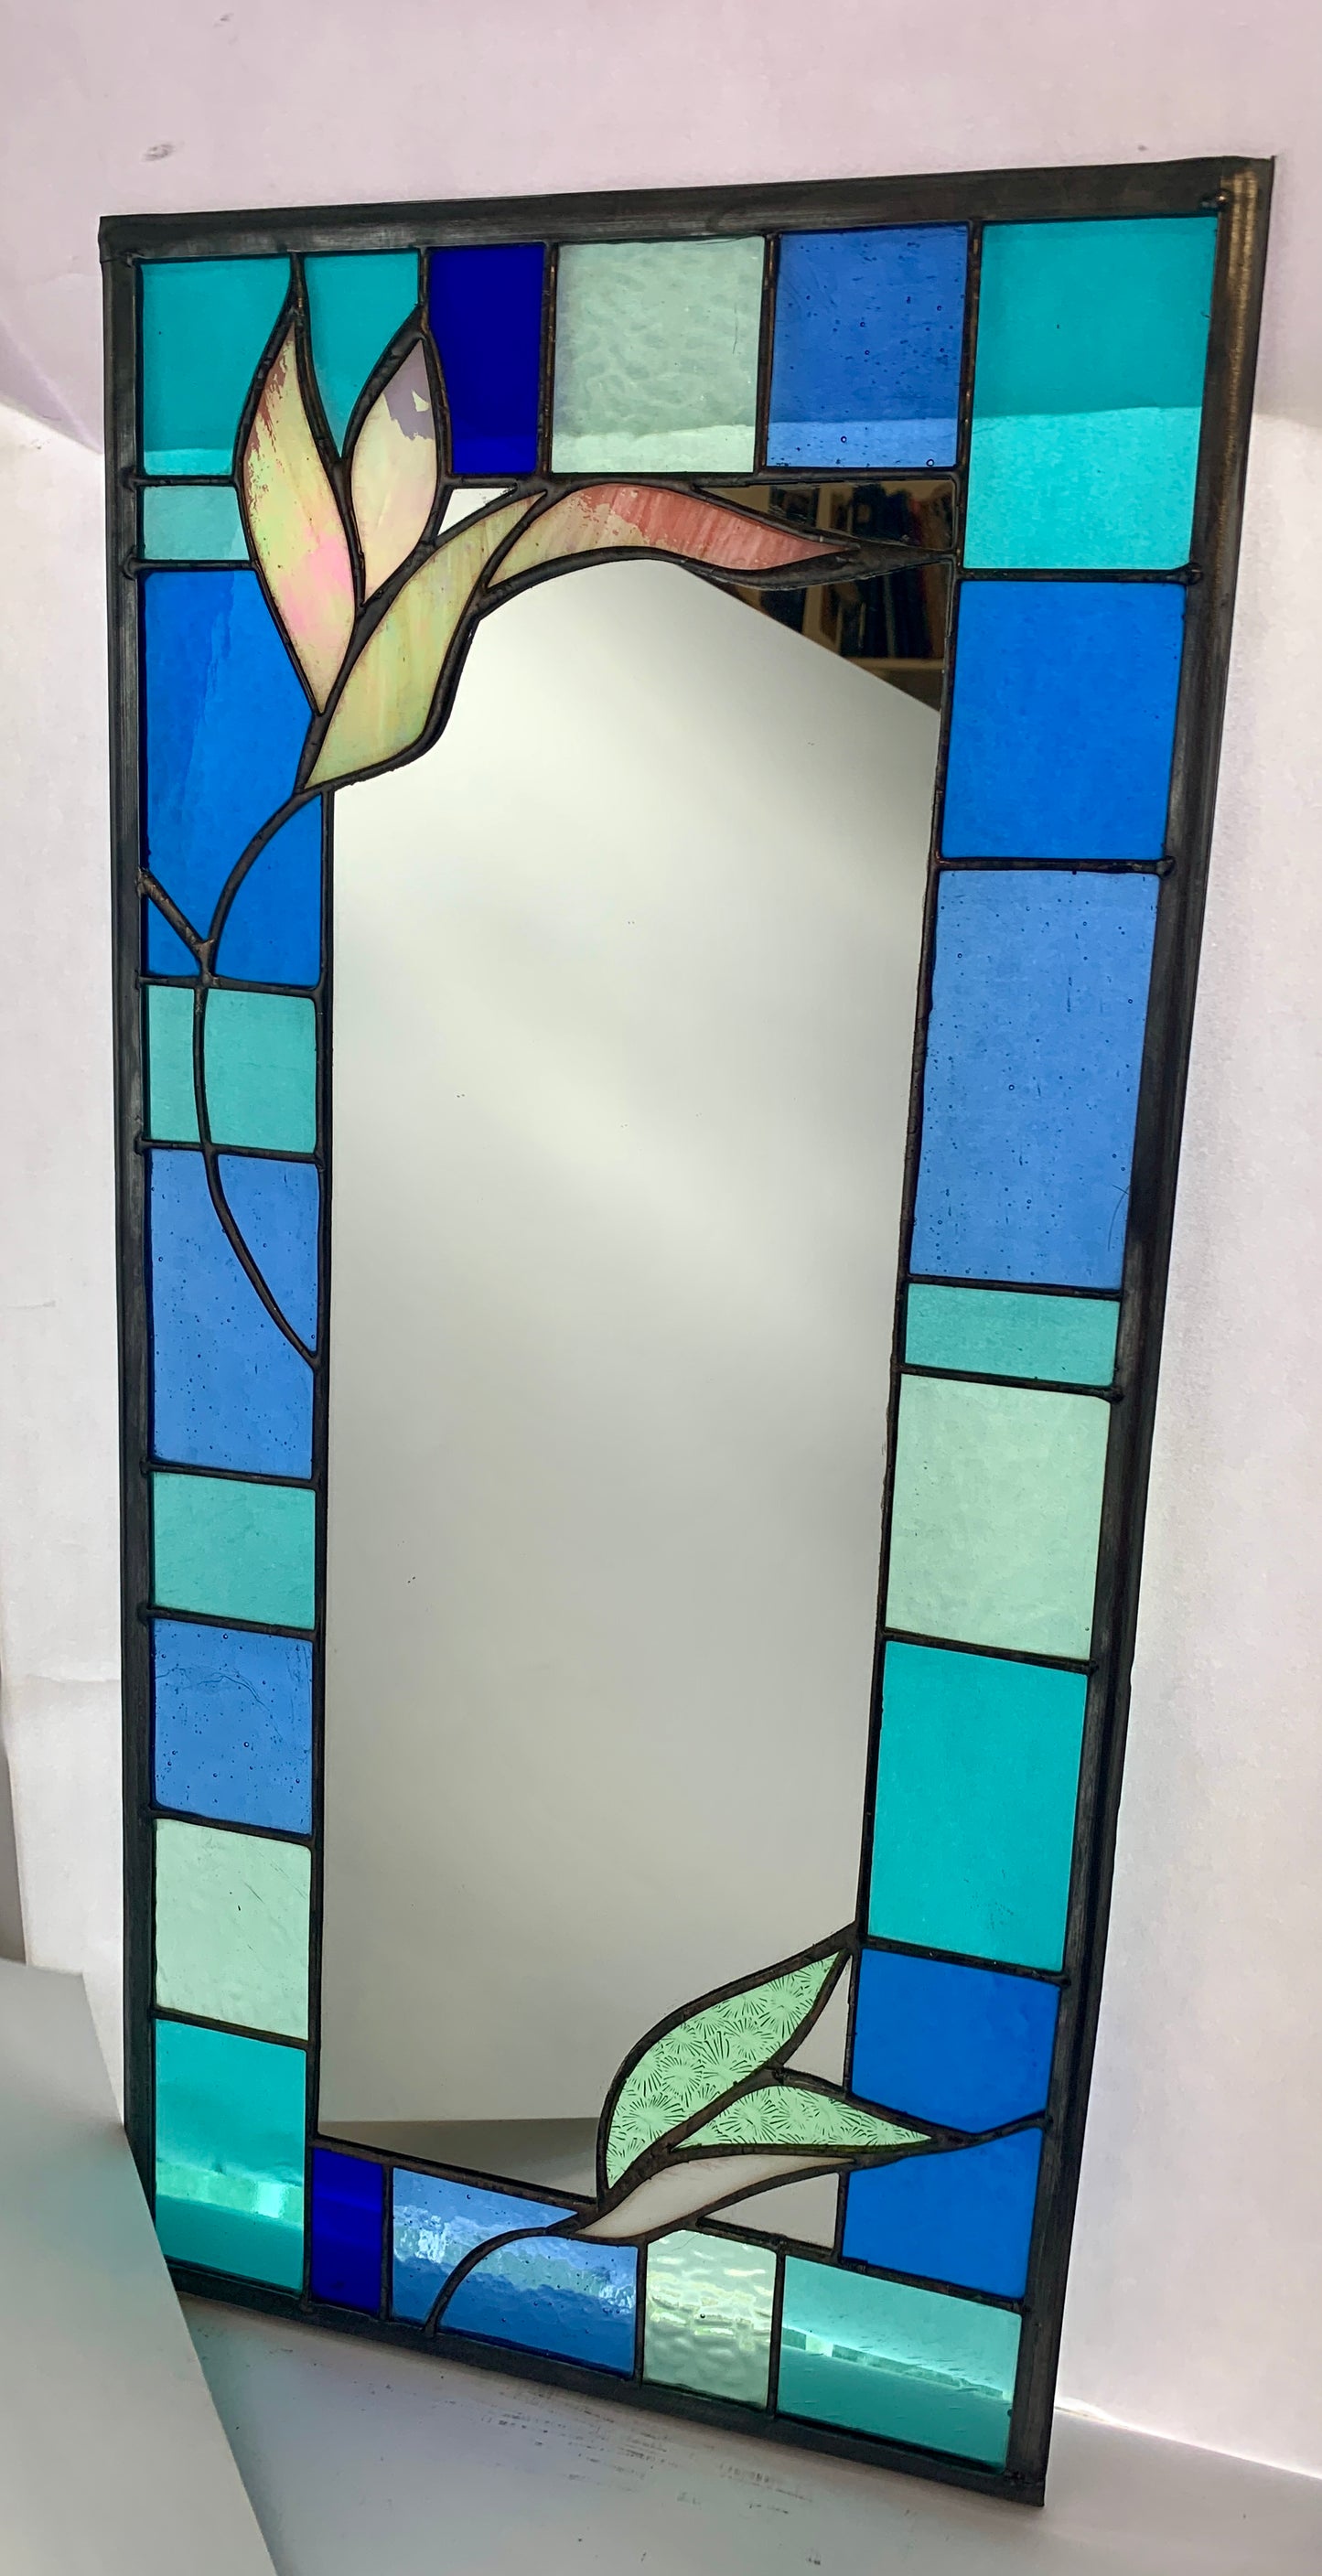 Stained Glass Mirror. Blue and Turquoise border glass; Irridiscent glass floral petals. Made by Dadswell Glass.